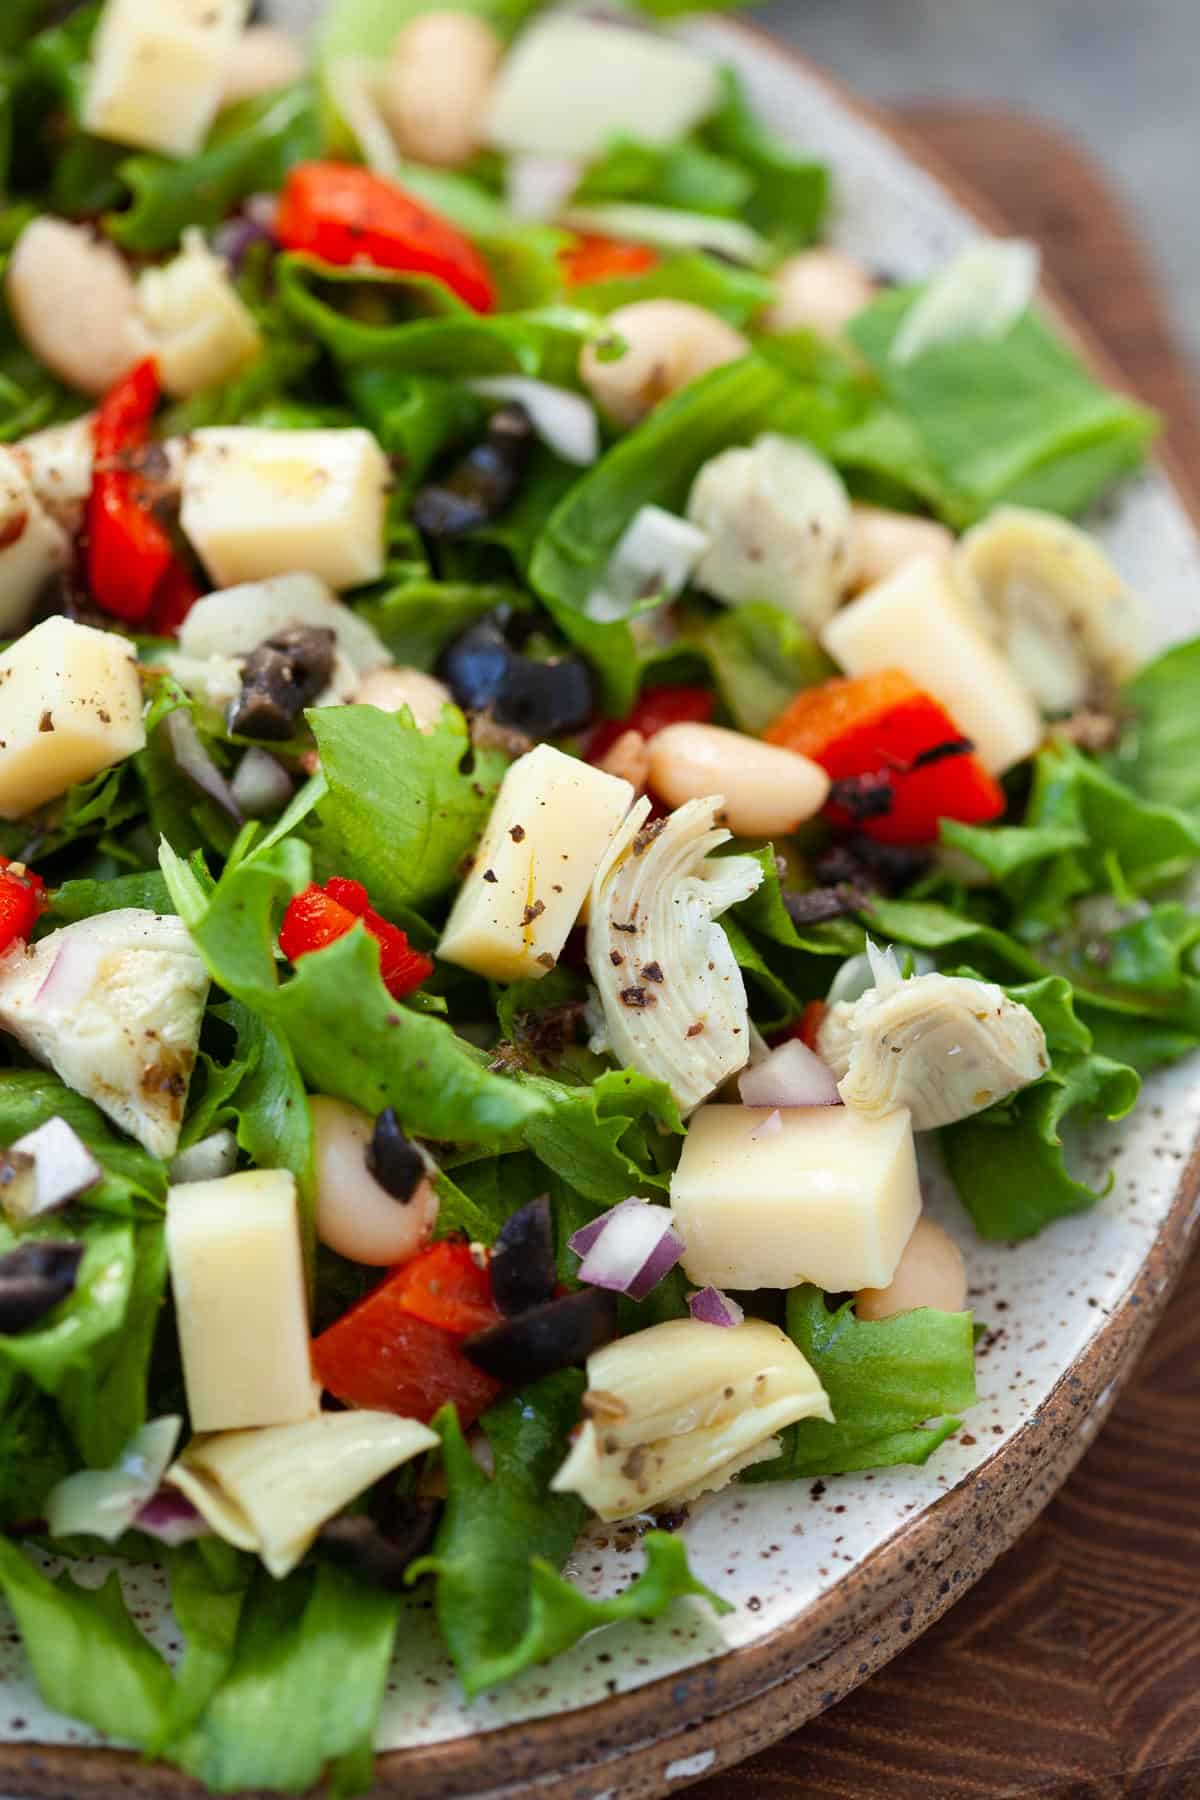 Italian chopped salad made with fresh ingredients